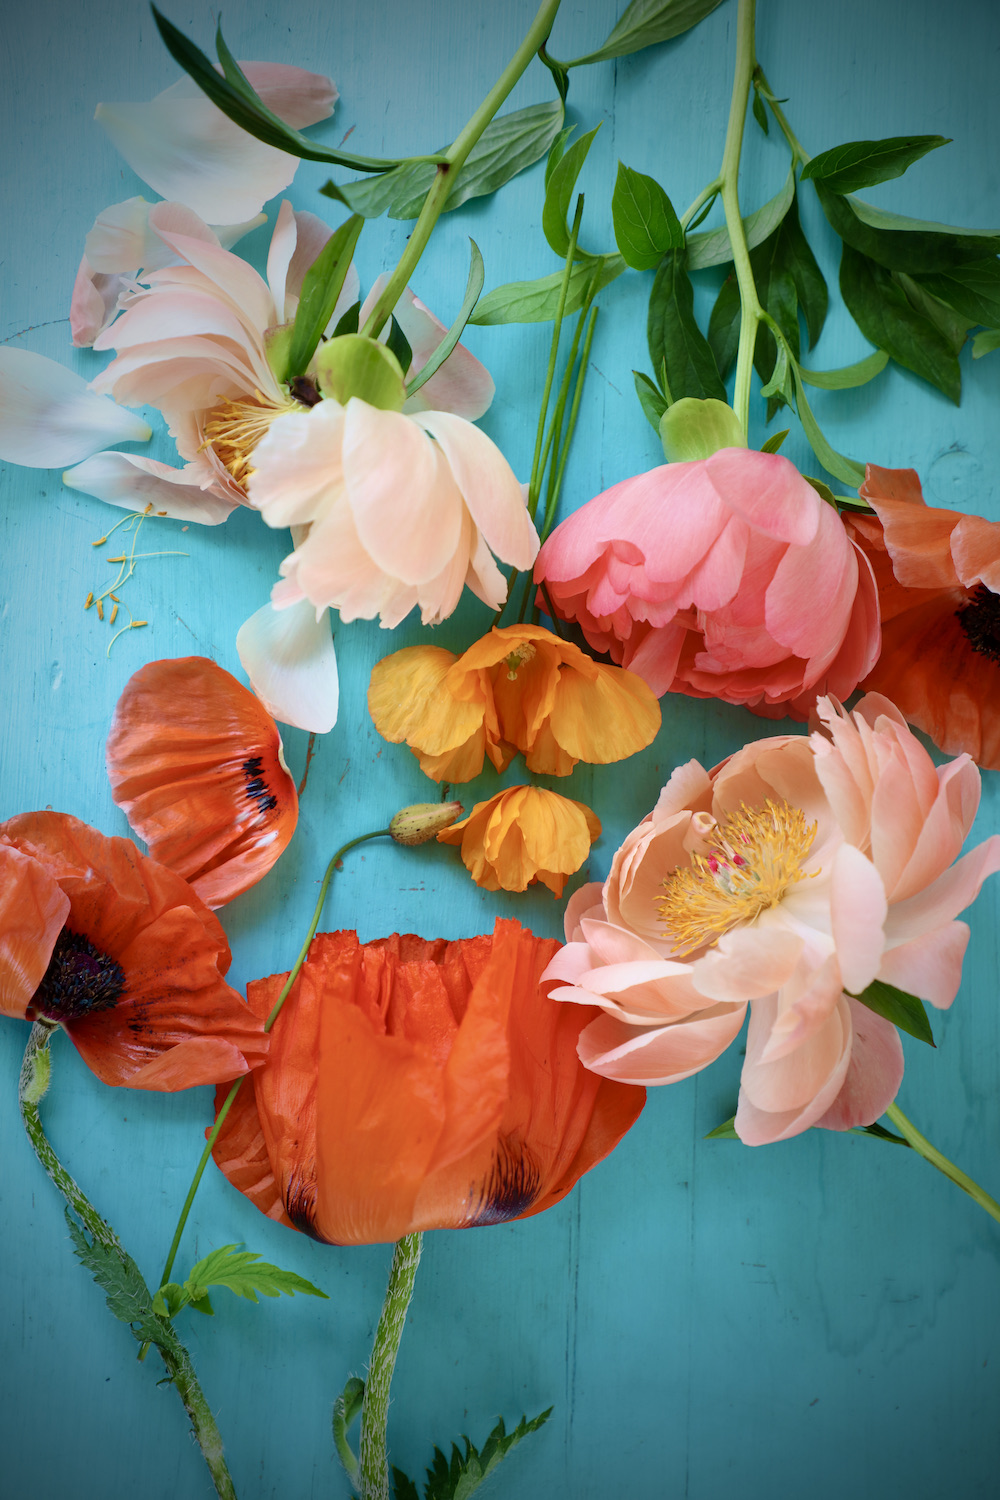 Selection of vibrant orange and soft pink peonies and poppies